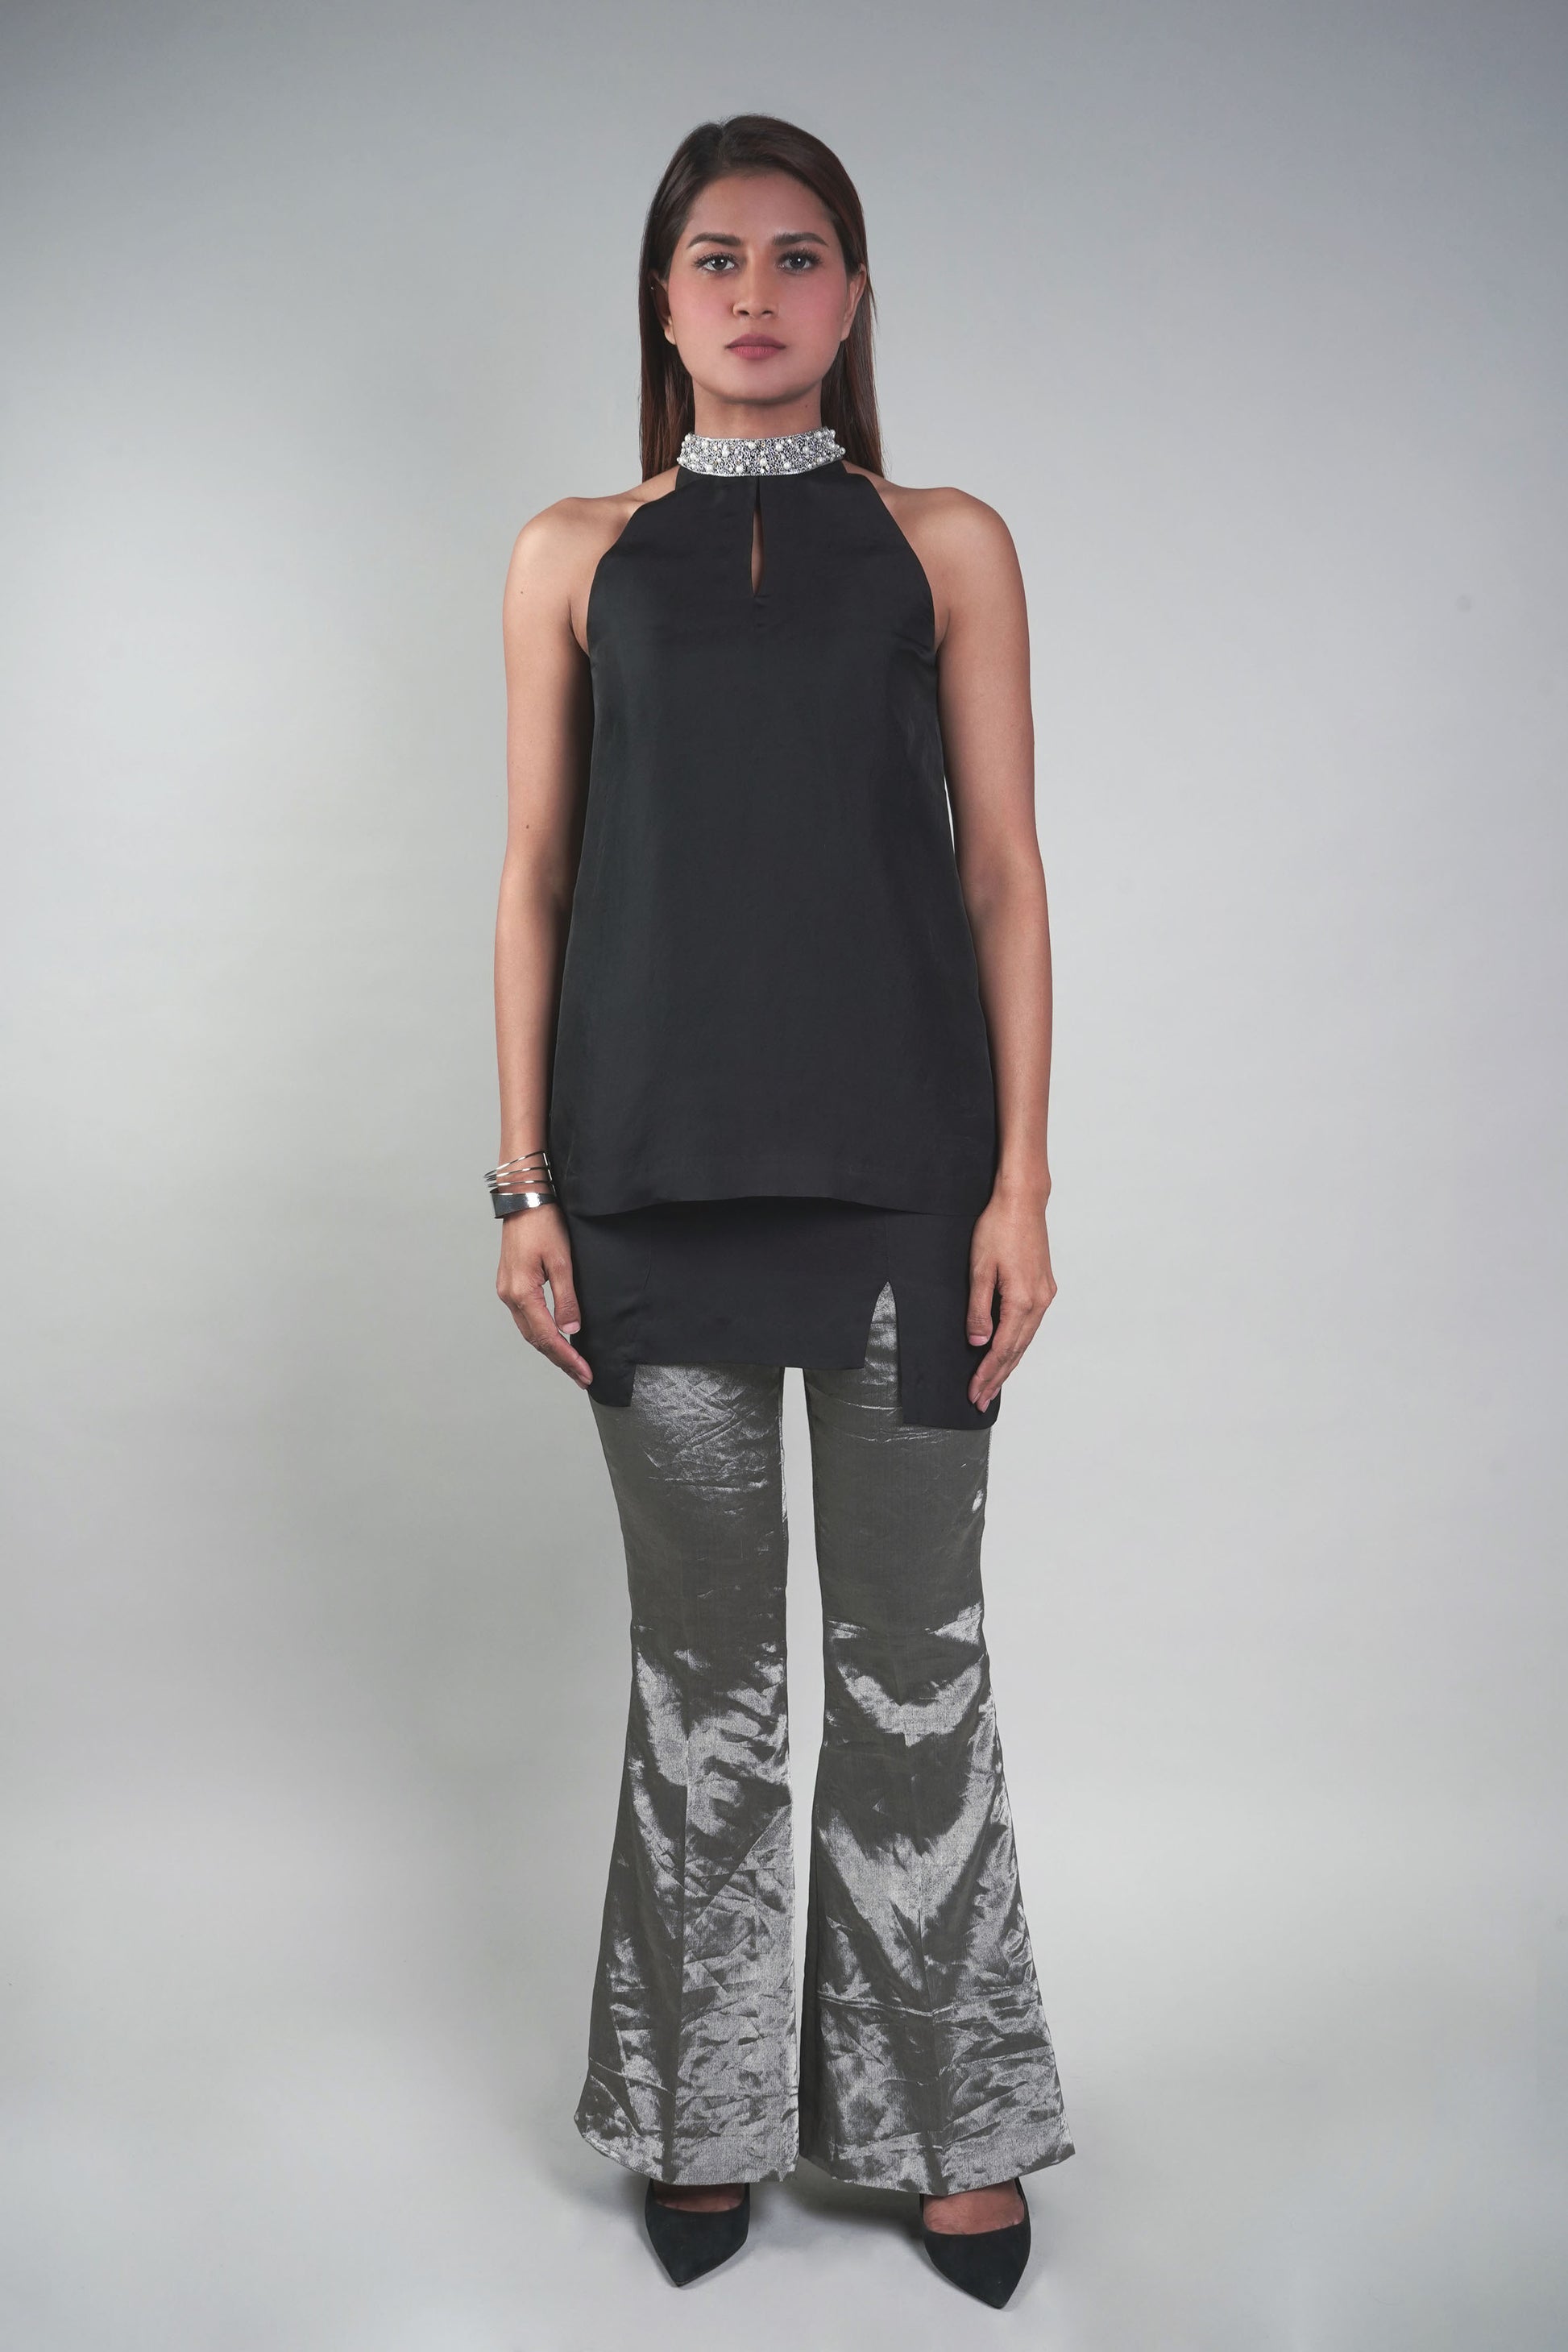 Our Cut Away Top & Bootcut Pants exude elegance and sophistication, making sophisticated ensembles perfect for wedding parties, holiday evenings and special occasions.